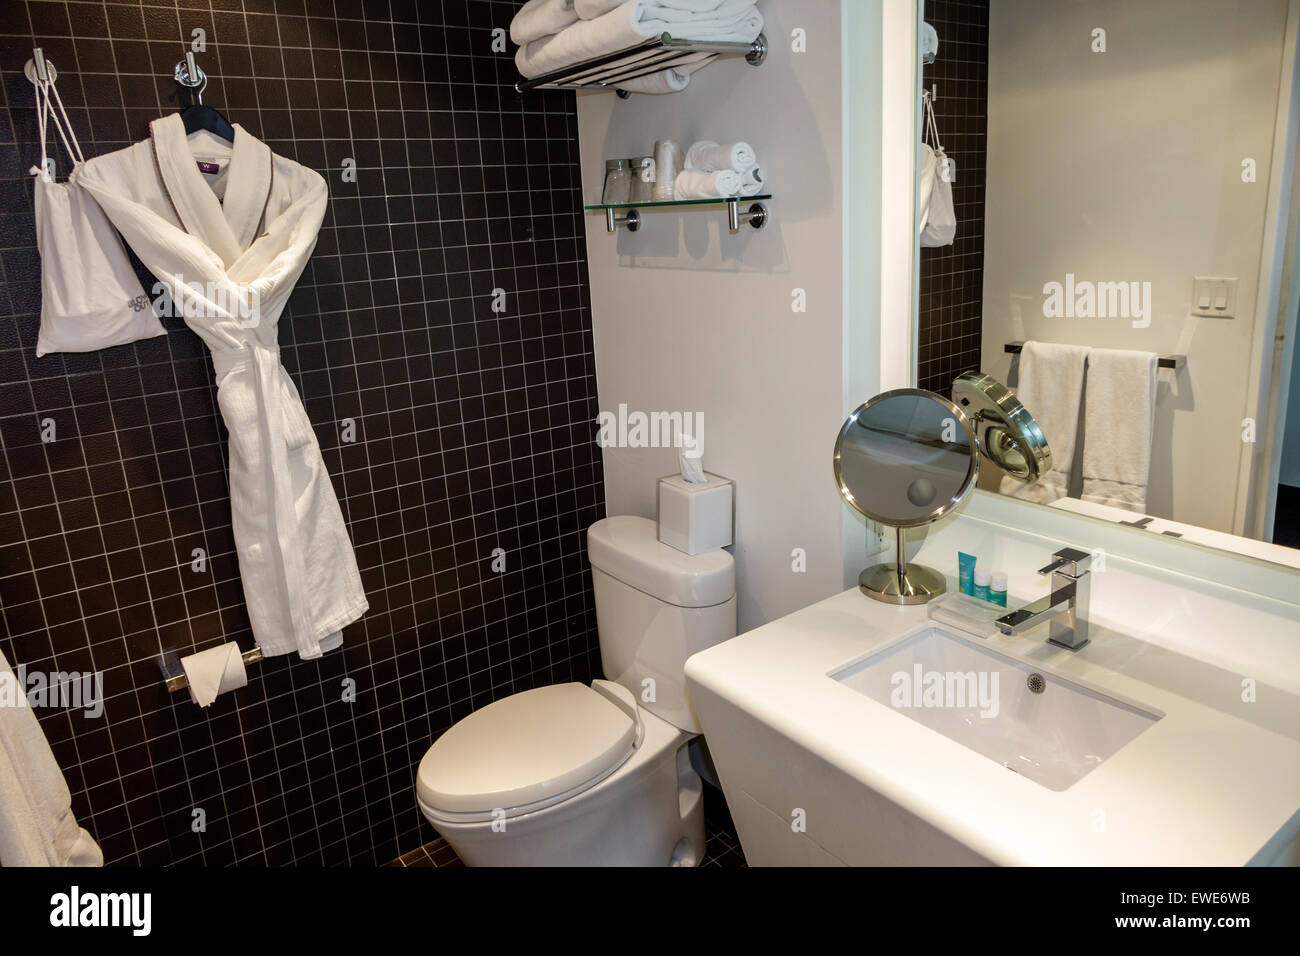 New York City,NY NYC,Manhattan,Lower,Financial District,W Downtown,hotel,interior inside,guest room,bathroom,robe,sink,toilet,white,NY150325020 Stock Photo